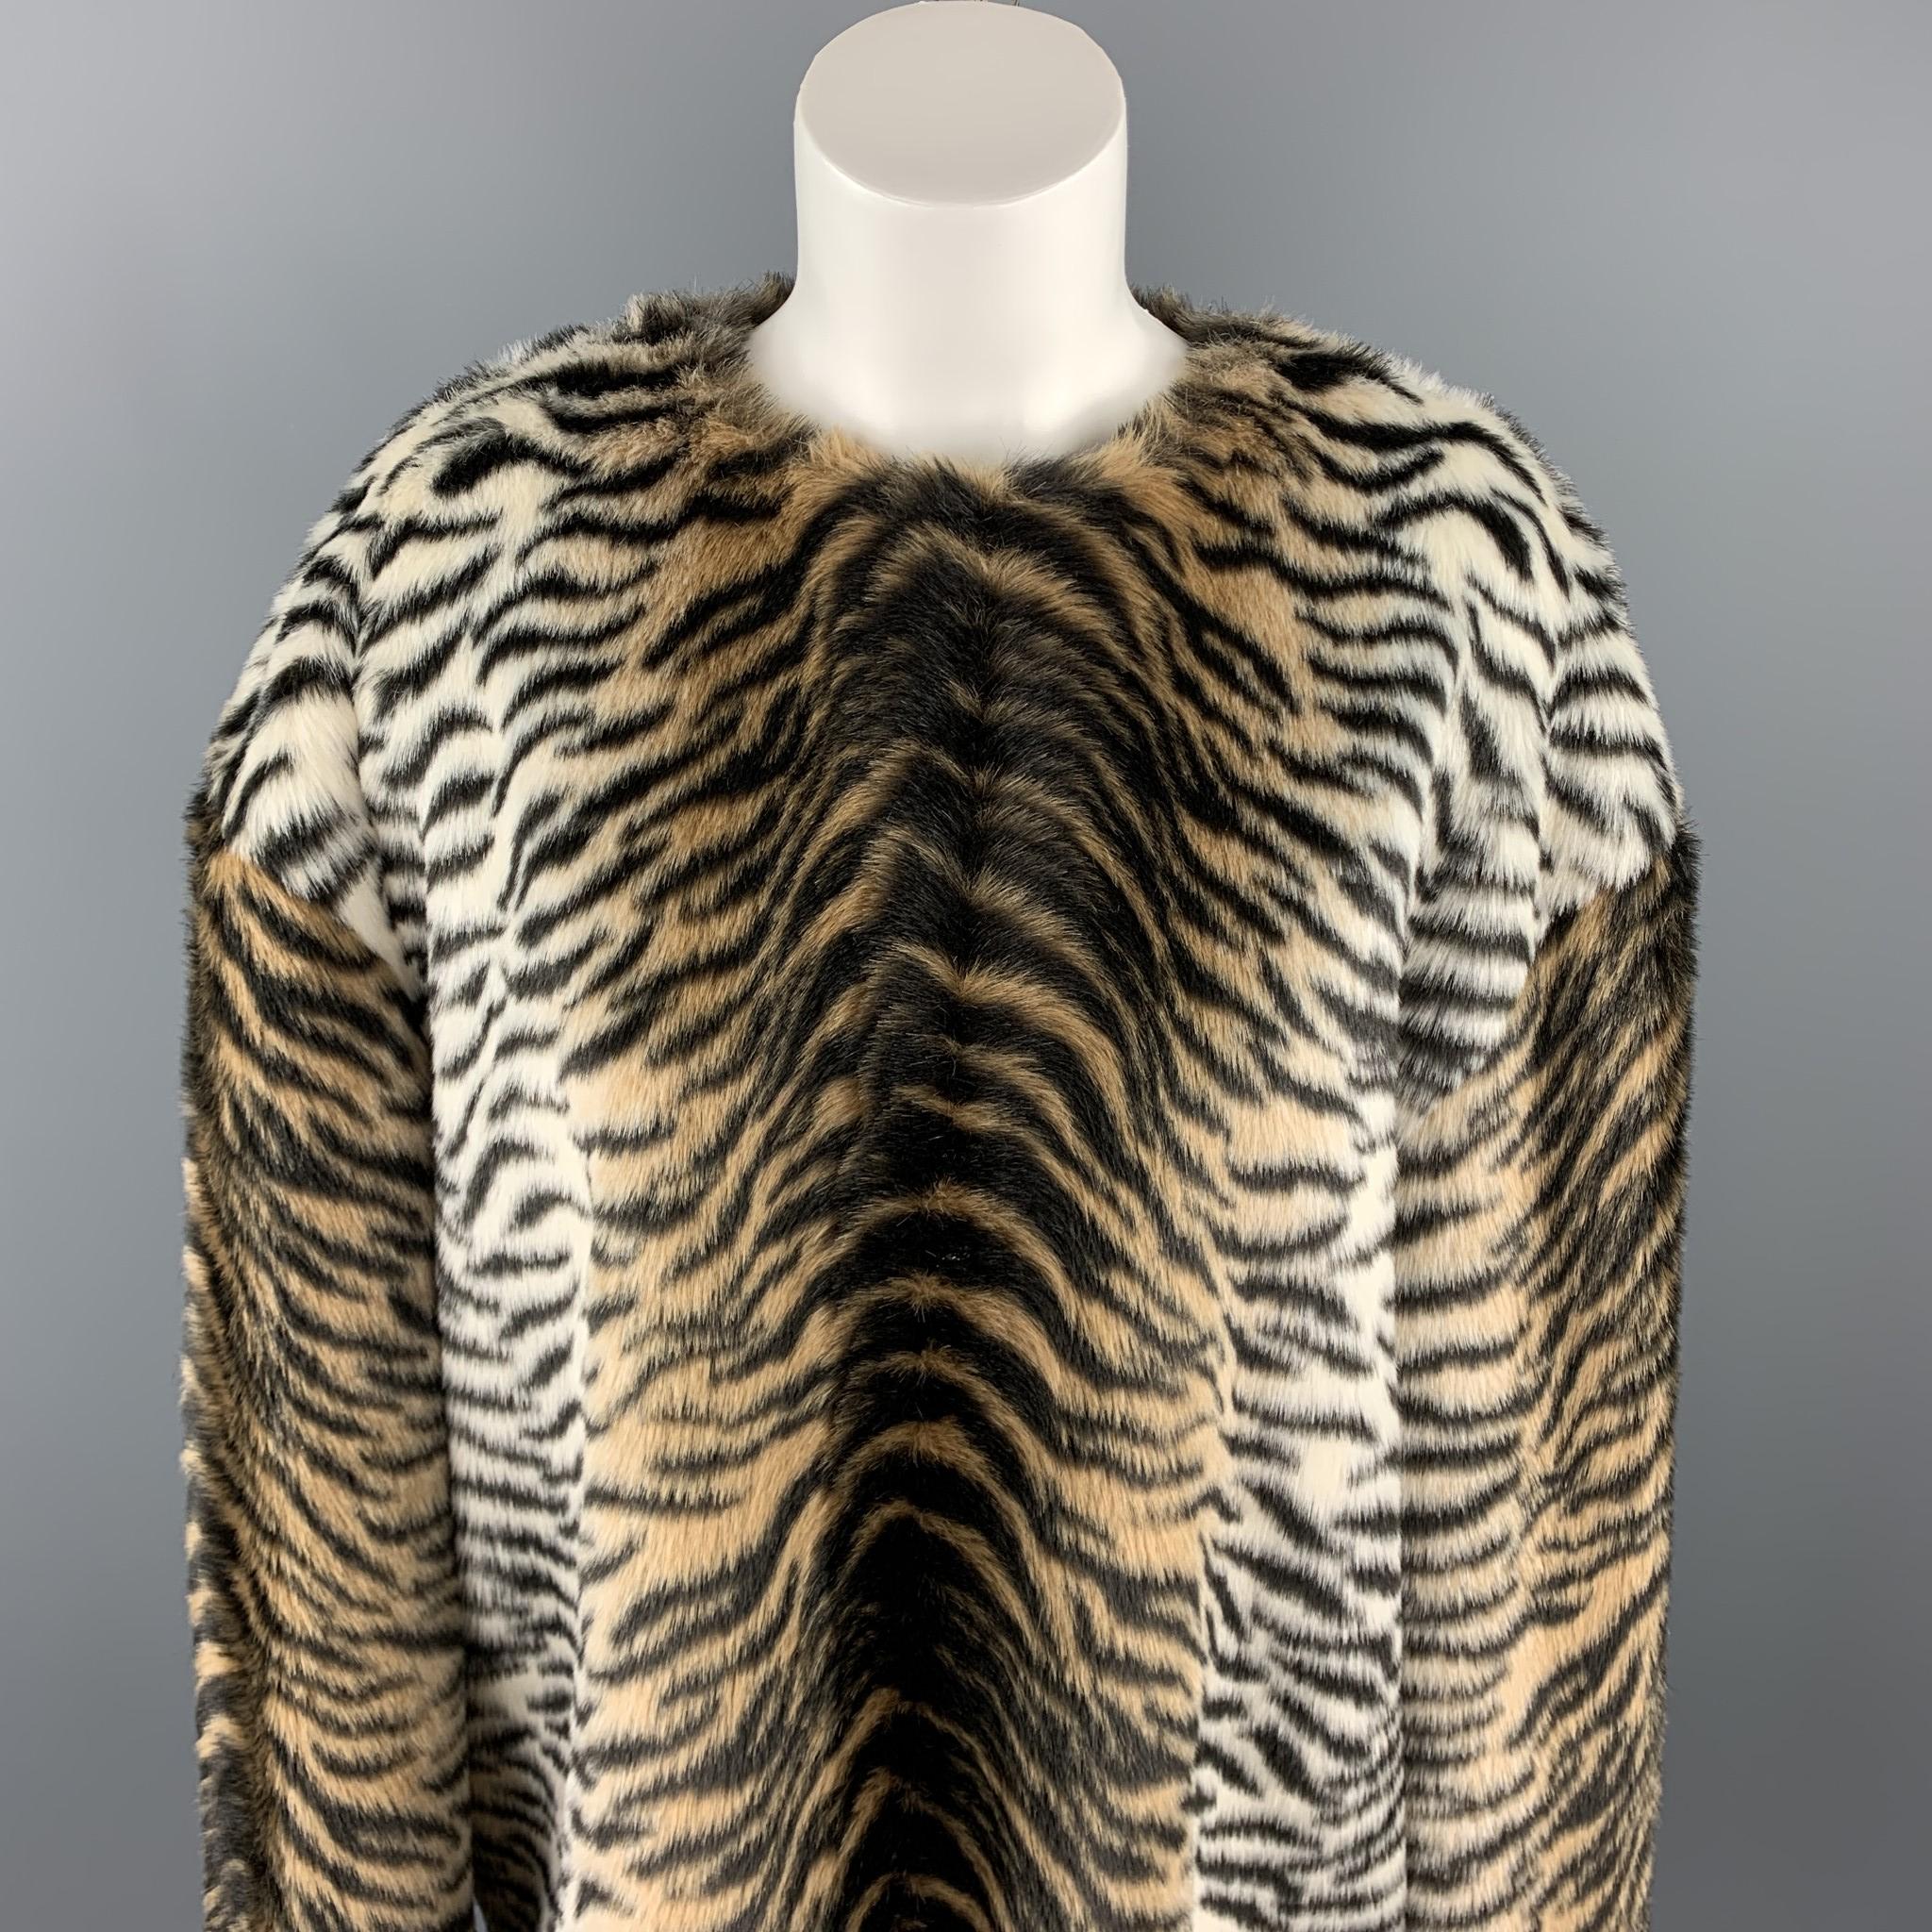 STELLA McCARTNEY sweater comes in a black & tan tiger print faux fur featuring a oversized fit and a back hook & eye closure. Made in Hungary.

Excellent Pre-Owned Condition.
Marked: 42

Measurements:

Shoulder: 23 in. 
Bust: 48 in. 
Sleeve: 21 in.